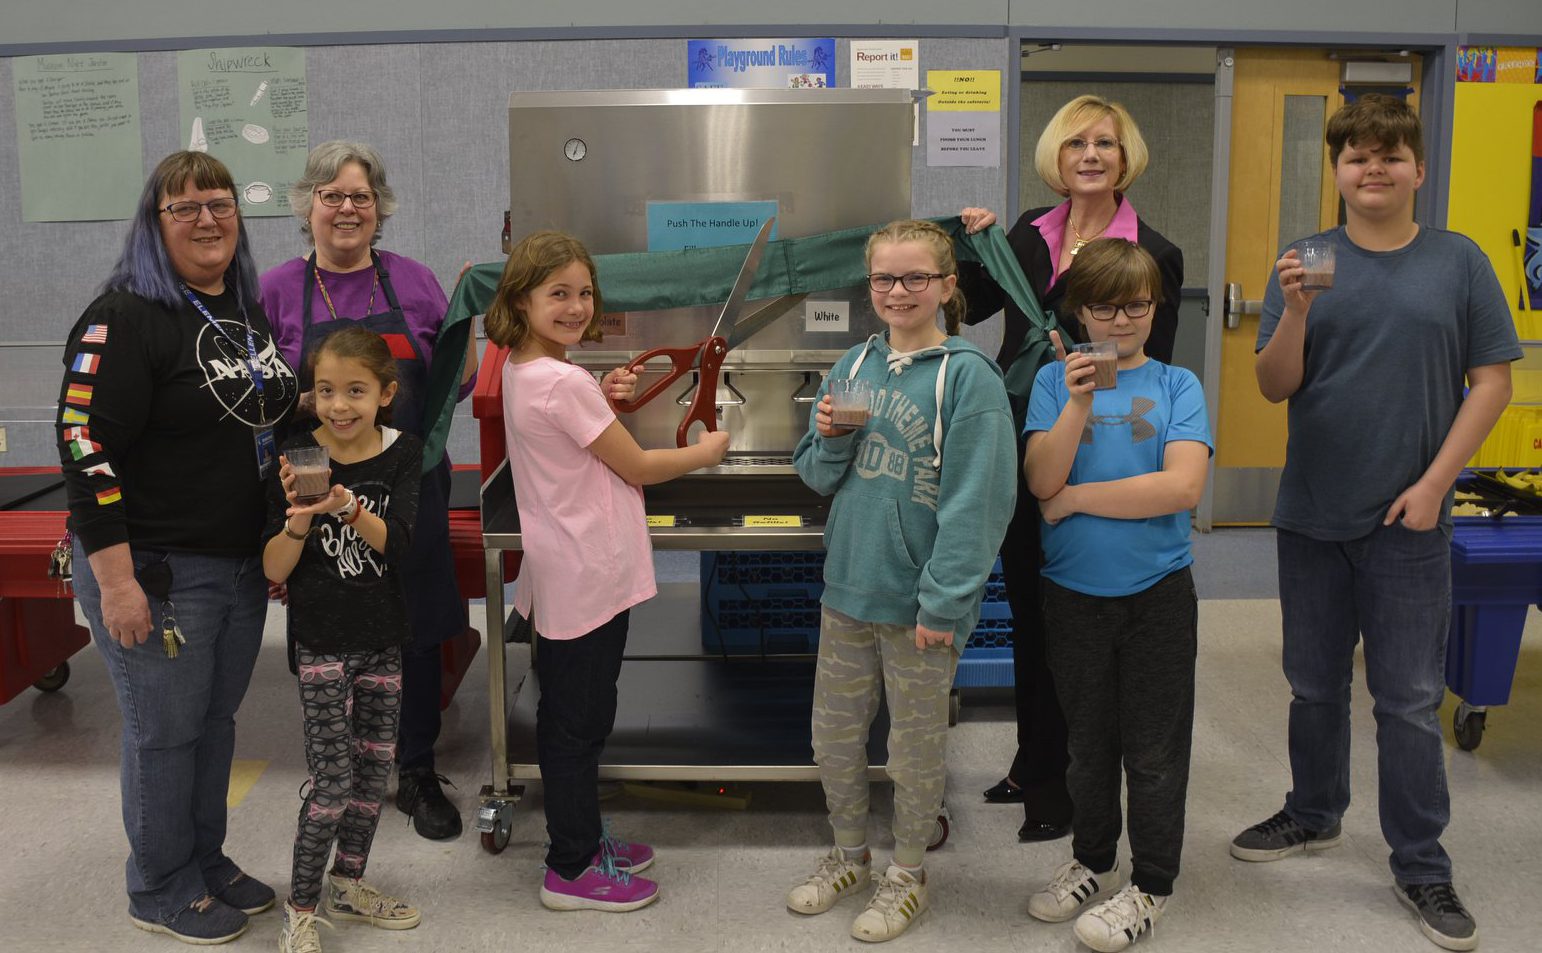 Members of the Gause Green Team, food service team, and students welcome the new milk dispenser to the school cafeteria, posing with cups of regular or chocolate milk.